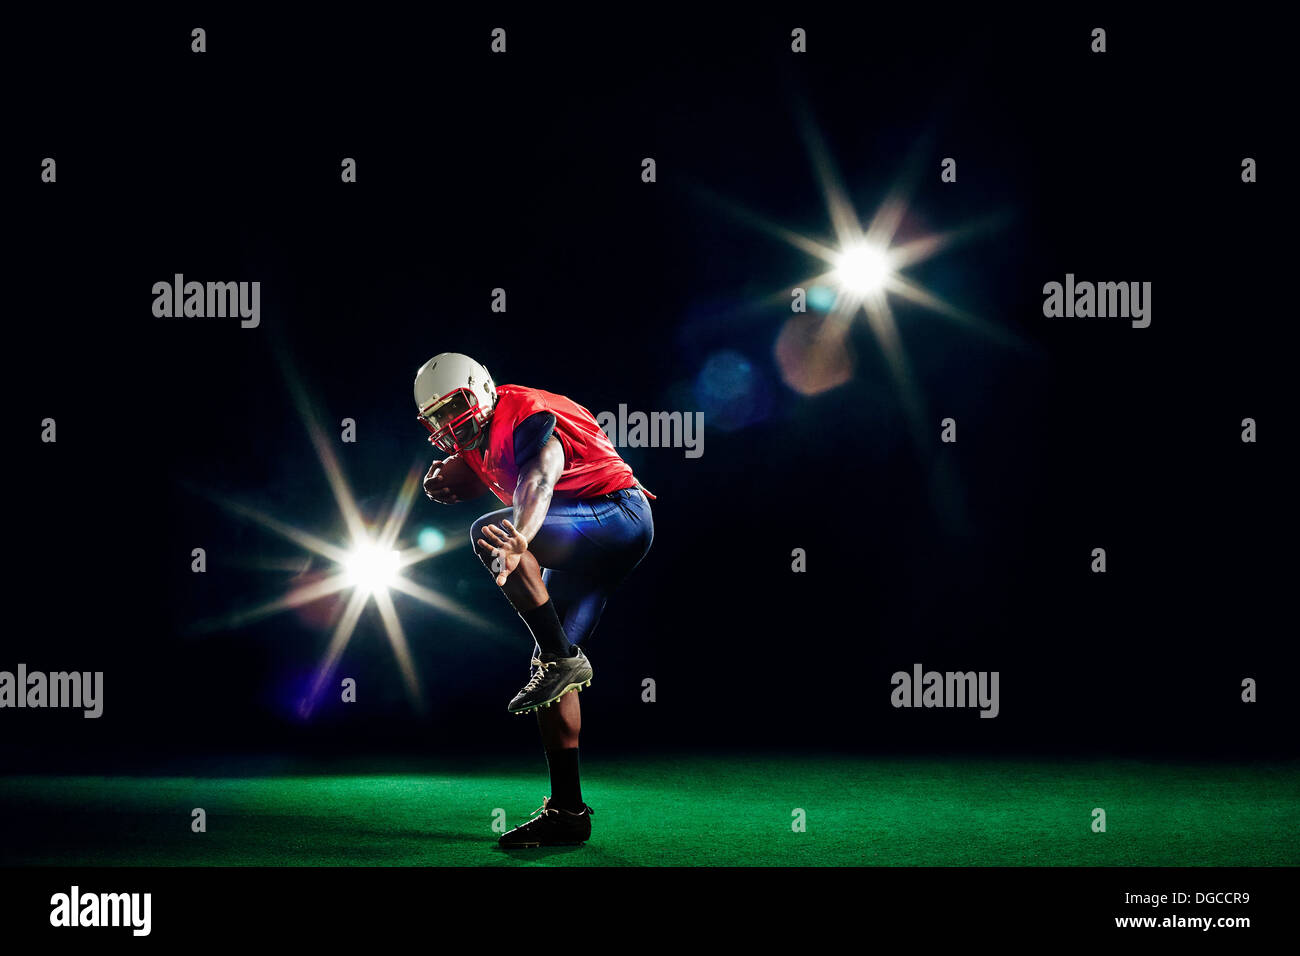 American football player throwing ball Banque D'Images